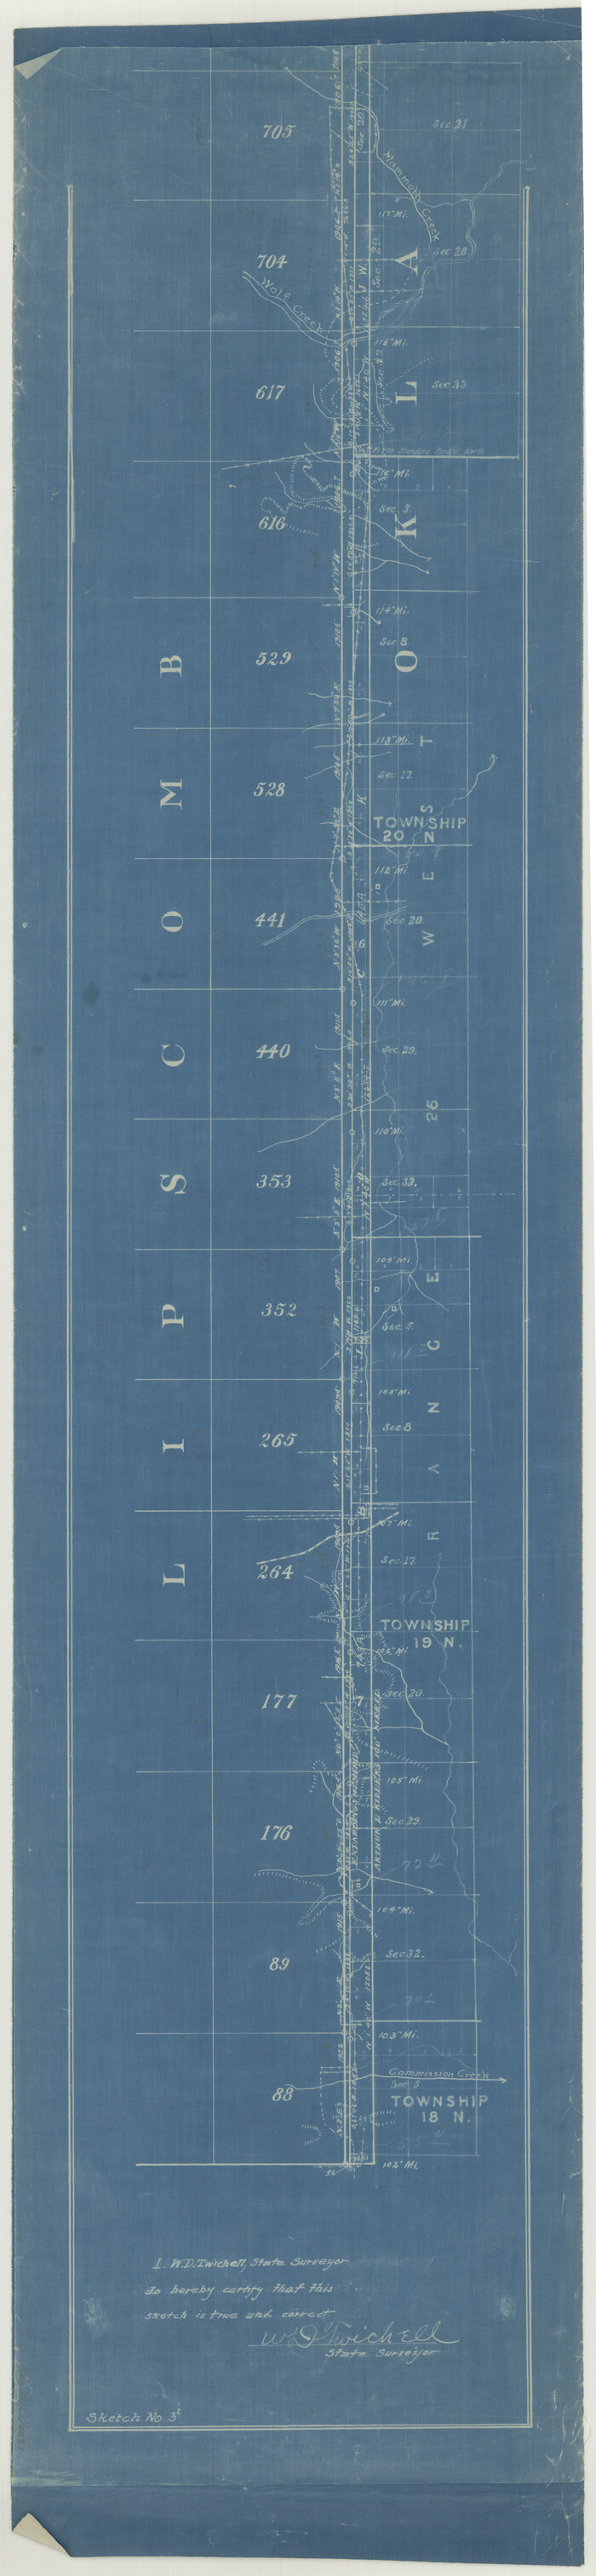 65381, Texas Panhandle East Boundary Line, General Map Collection